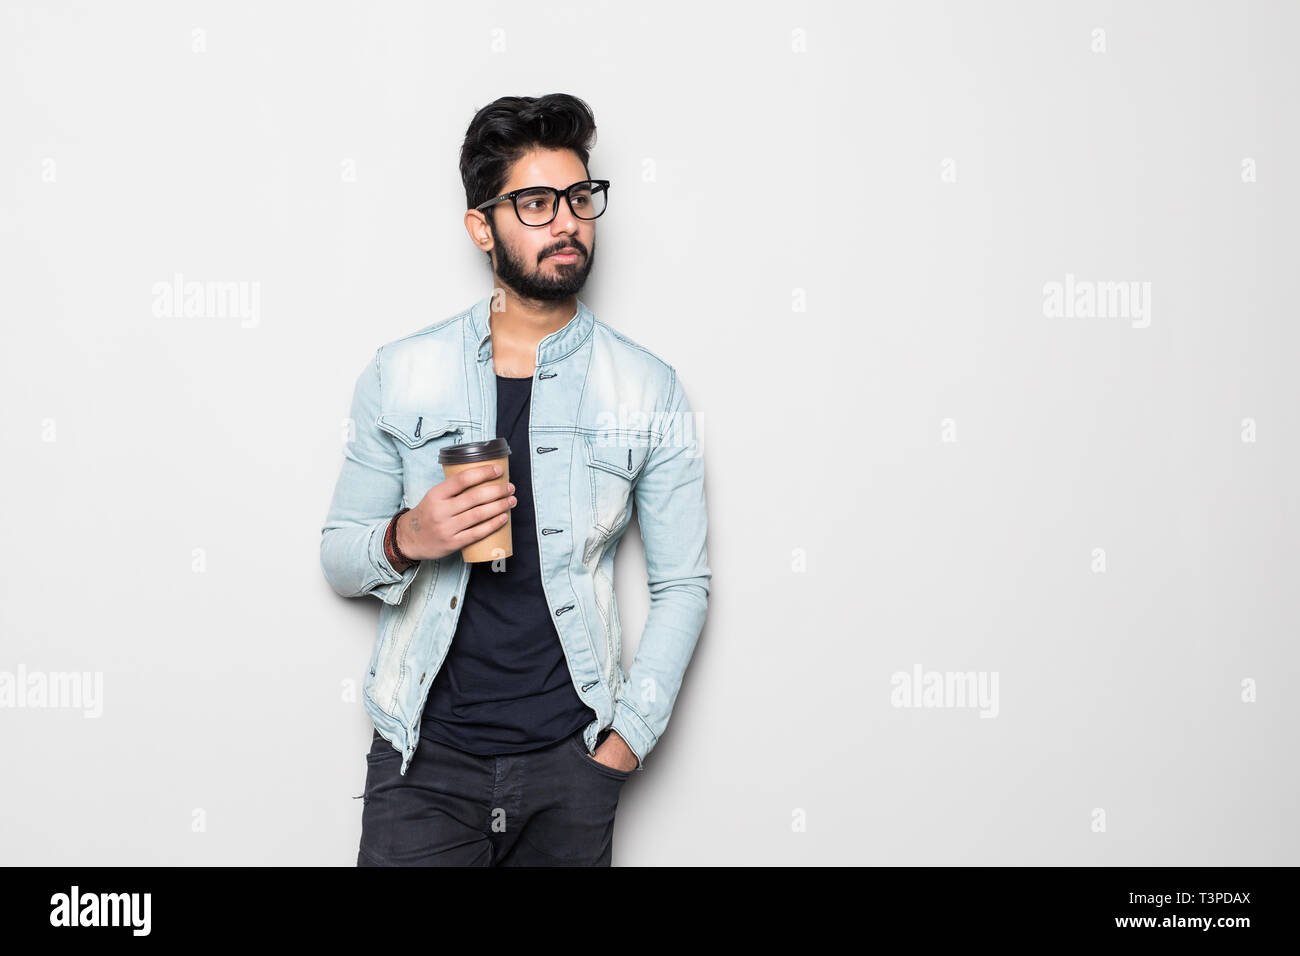 Indian guy drinking coffee. Asian standing on plain background with shadow and copy space. Handsome male model. Stock Photo